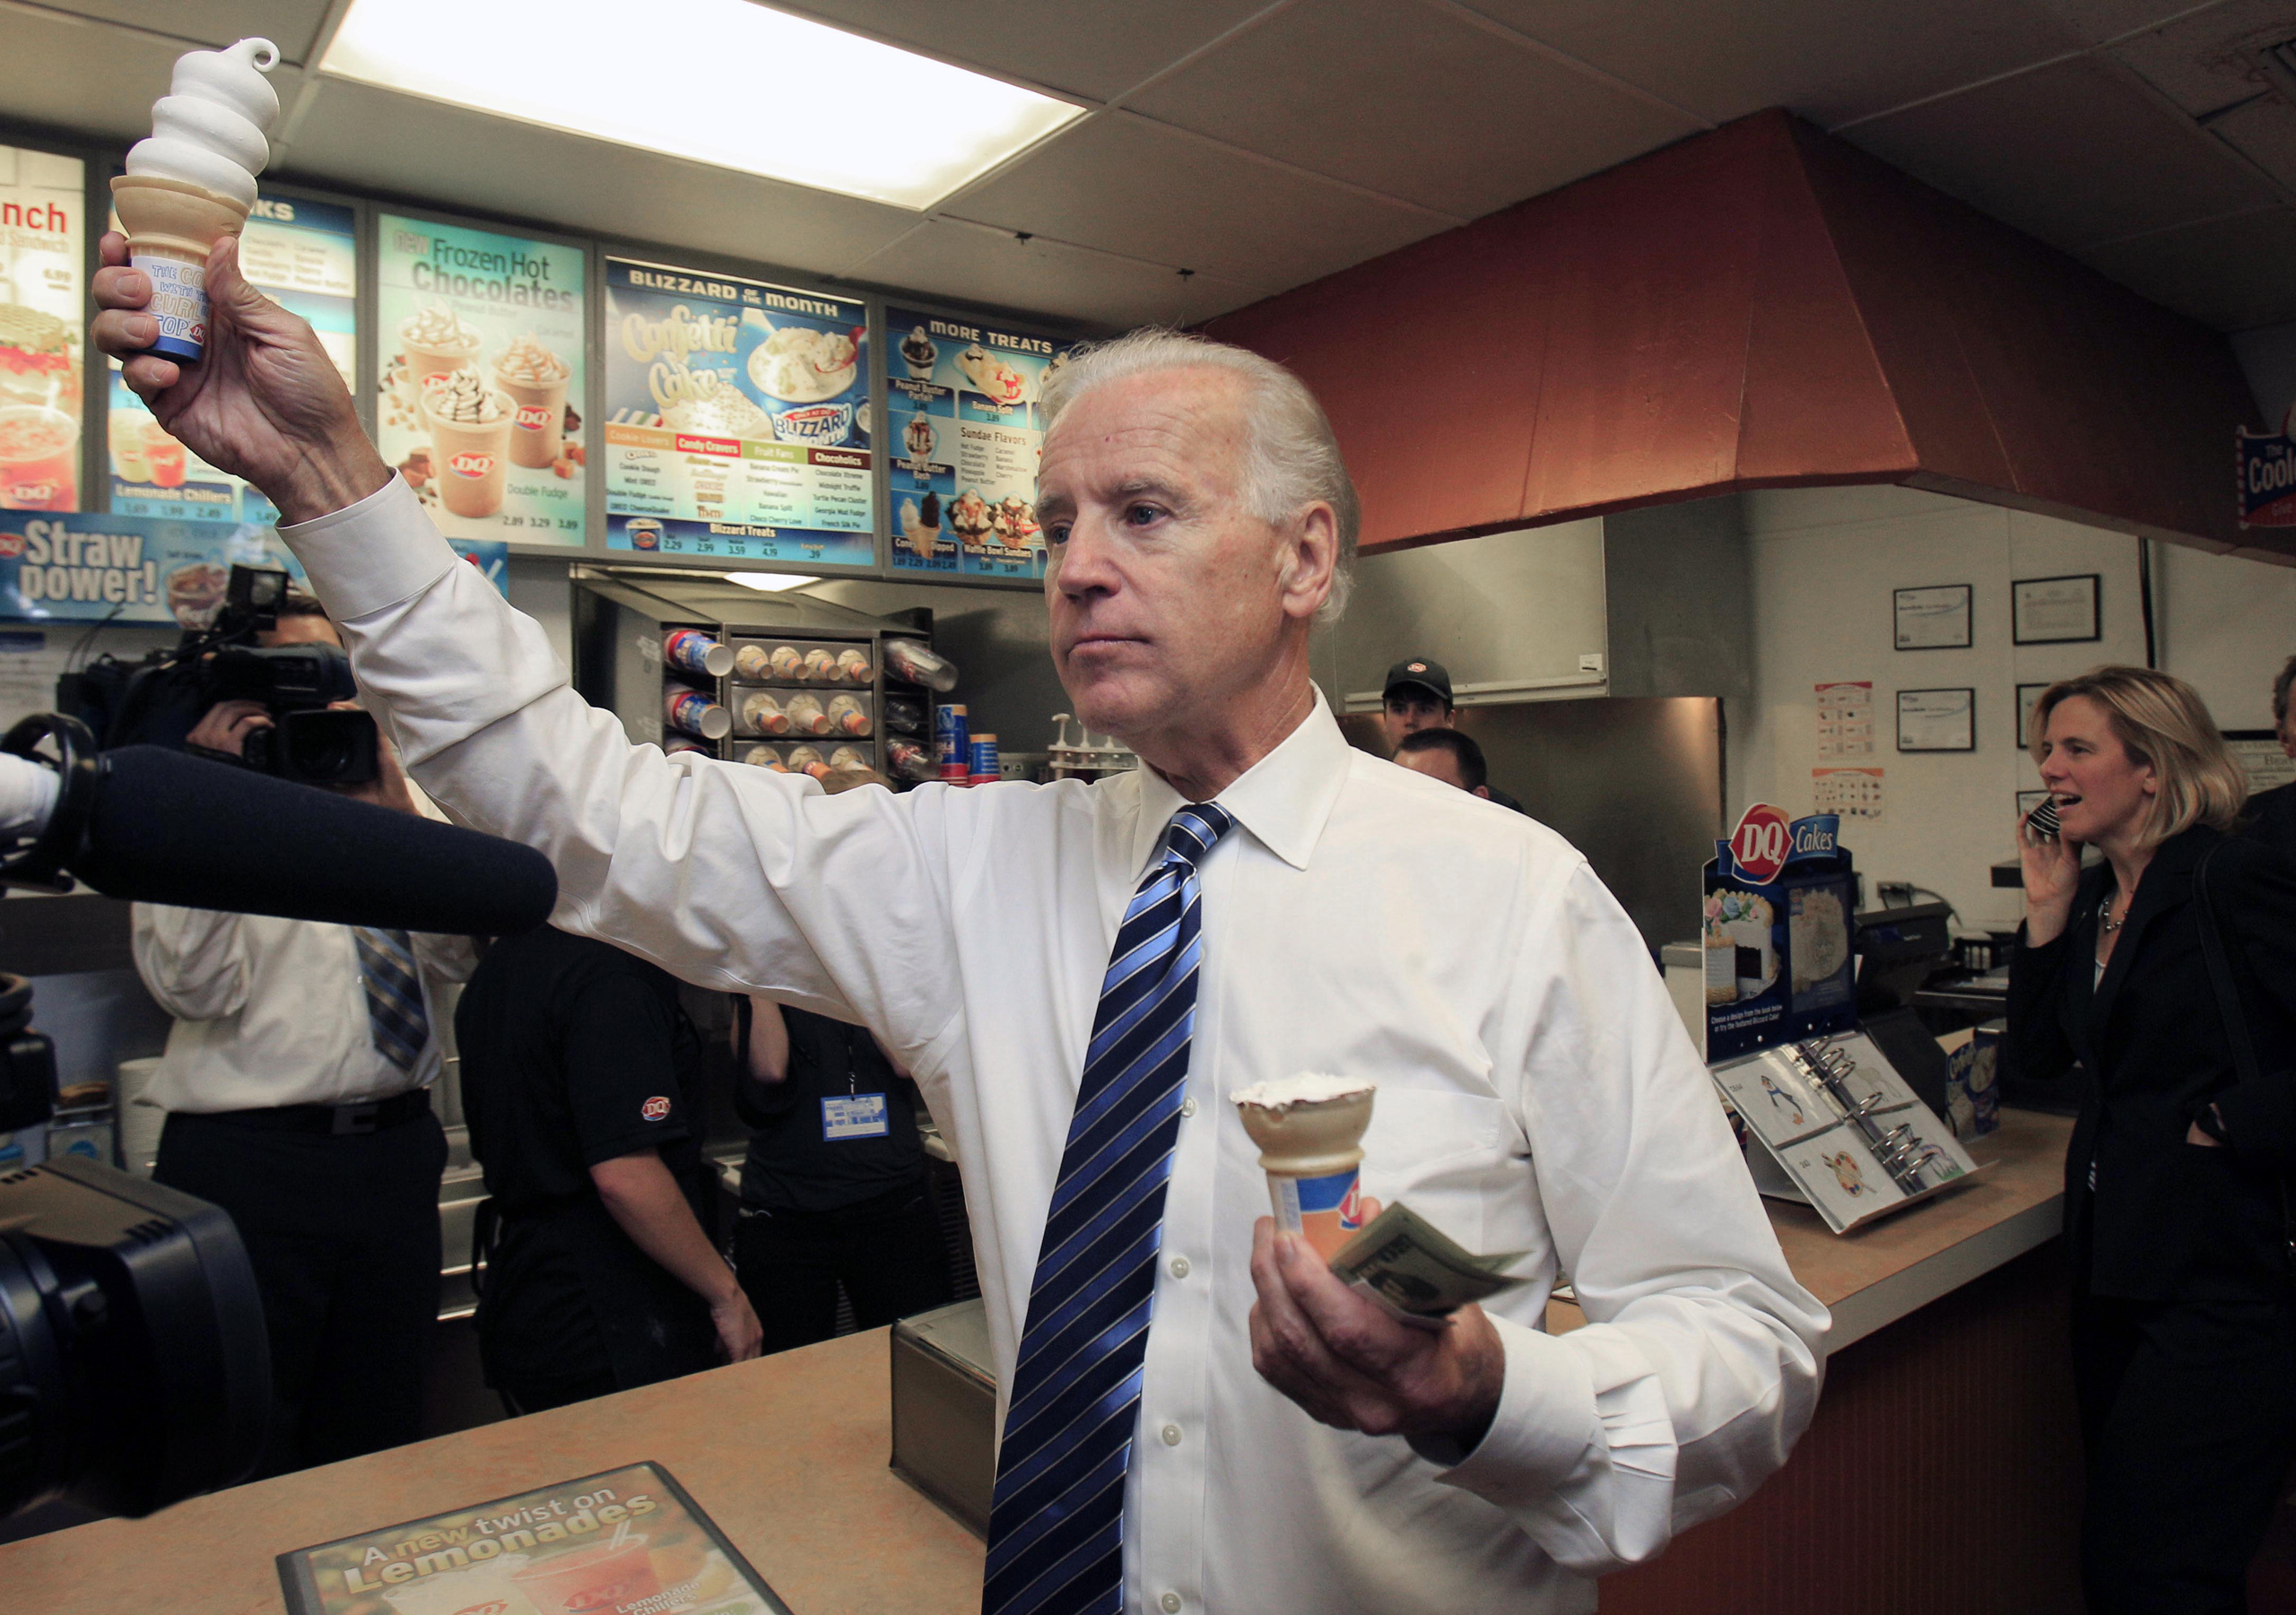 Vice President Joe Biden hands out ice cream cones after stopping at Dairy Queen in Steubenville, Ohio, on May 16, 2012.